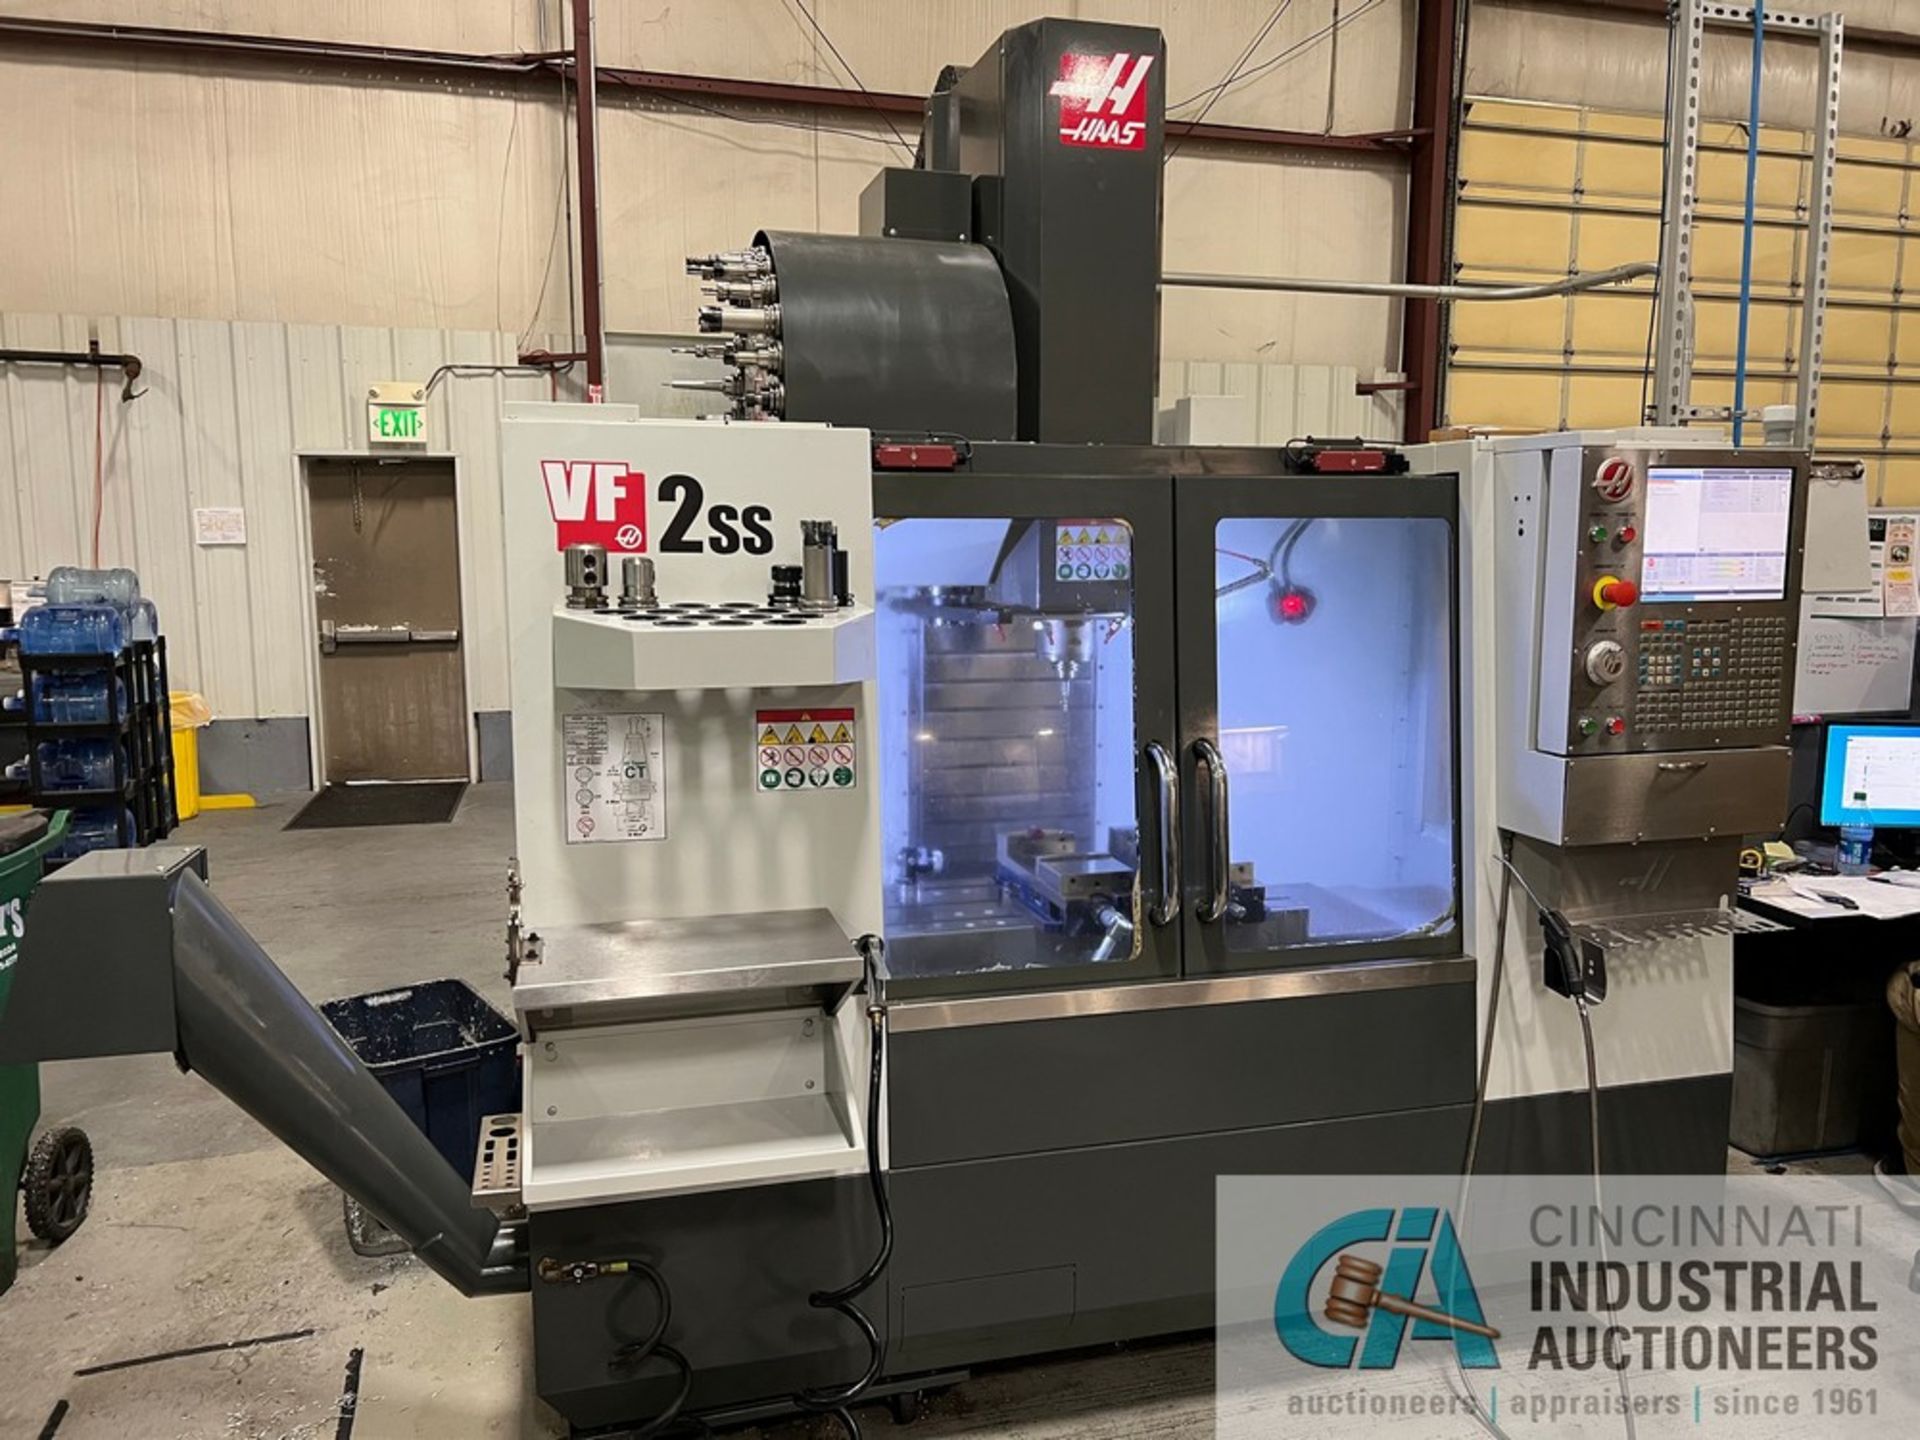 Haas Model VF-2SS CNC Vertical Machining Center (2016) 4,906 Cutting Hours Showing - Image 2 of 18